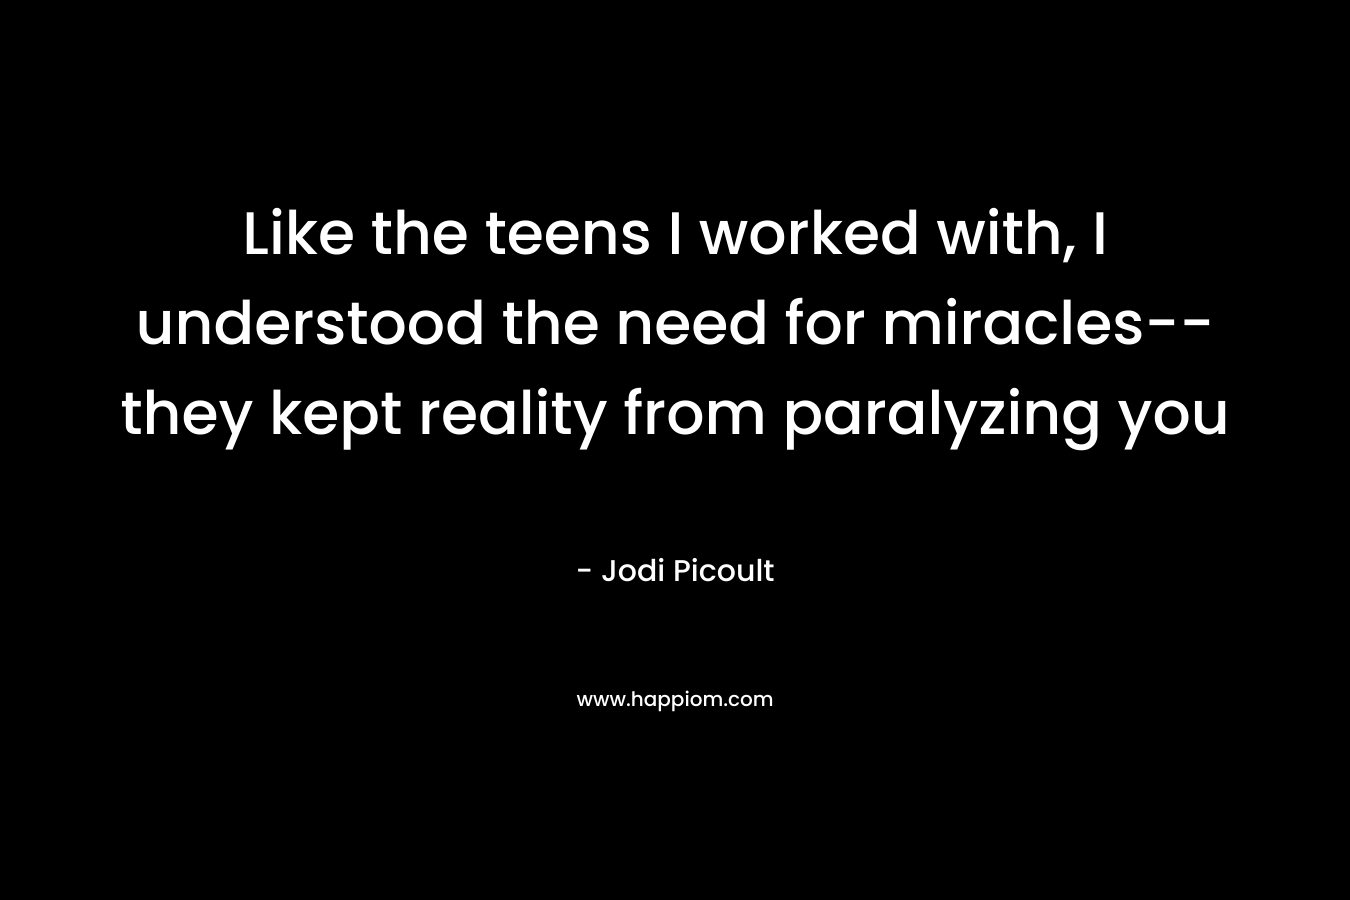 Like the teens I worked with, I understood the need for miracles--they kept reality from paralyzing you